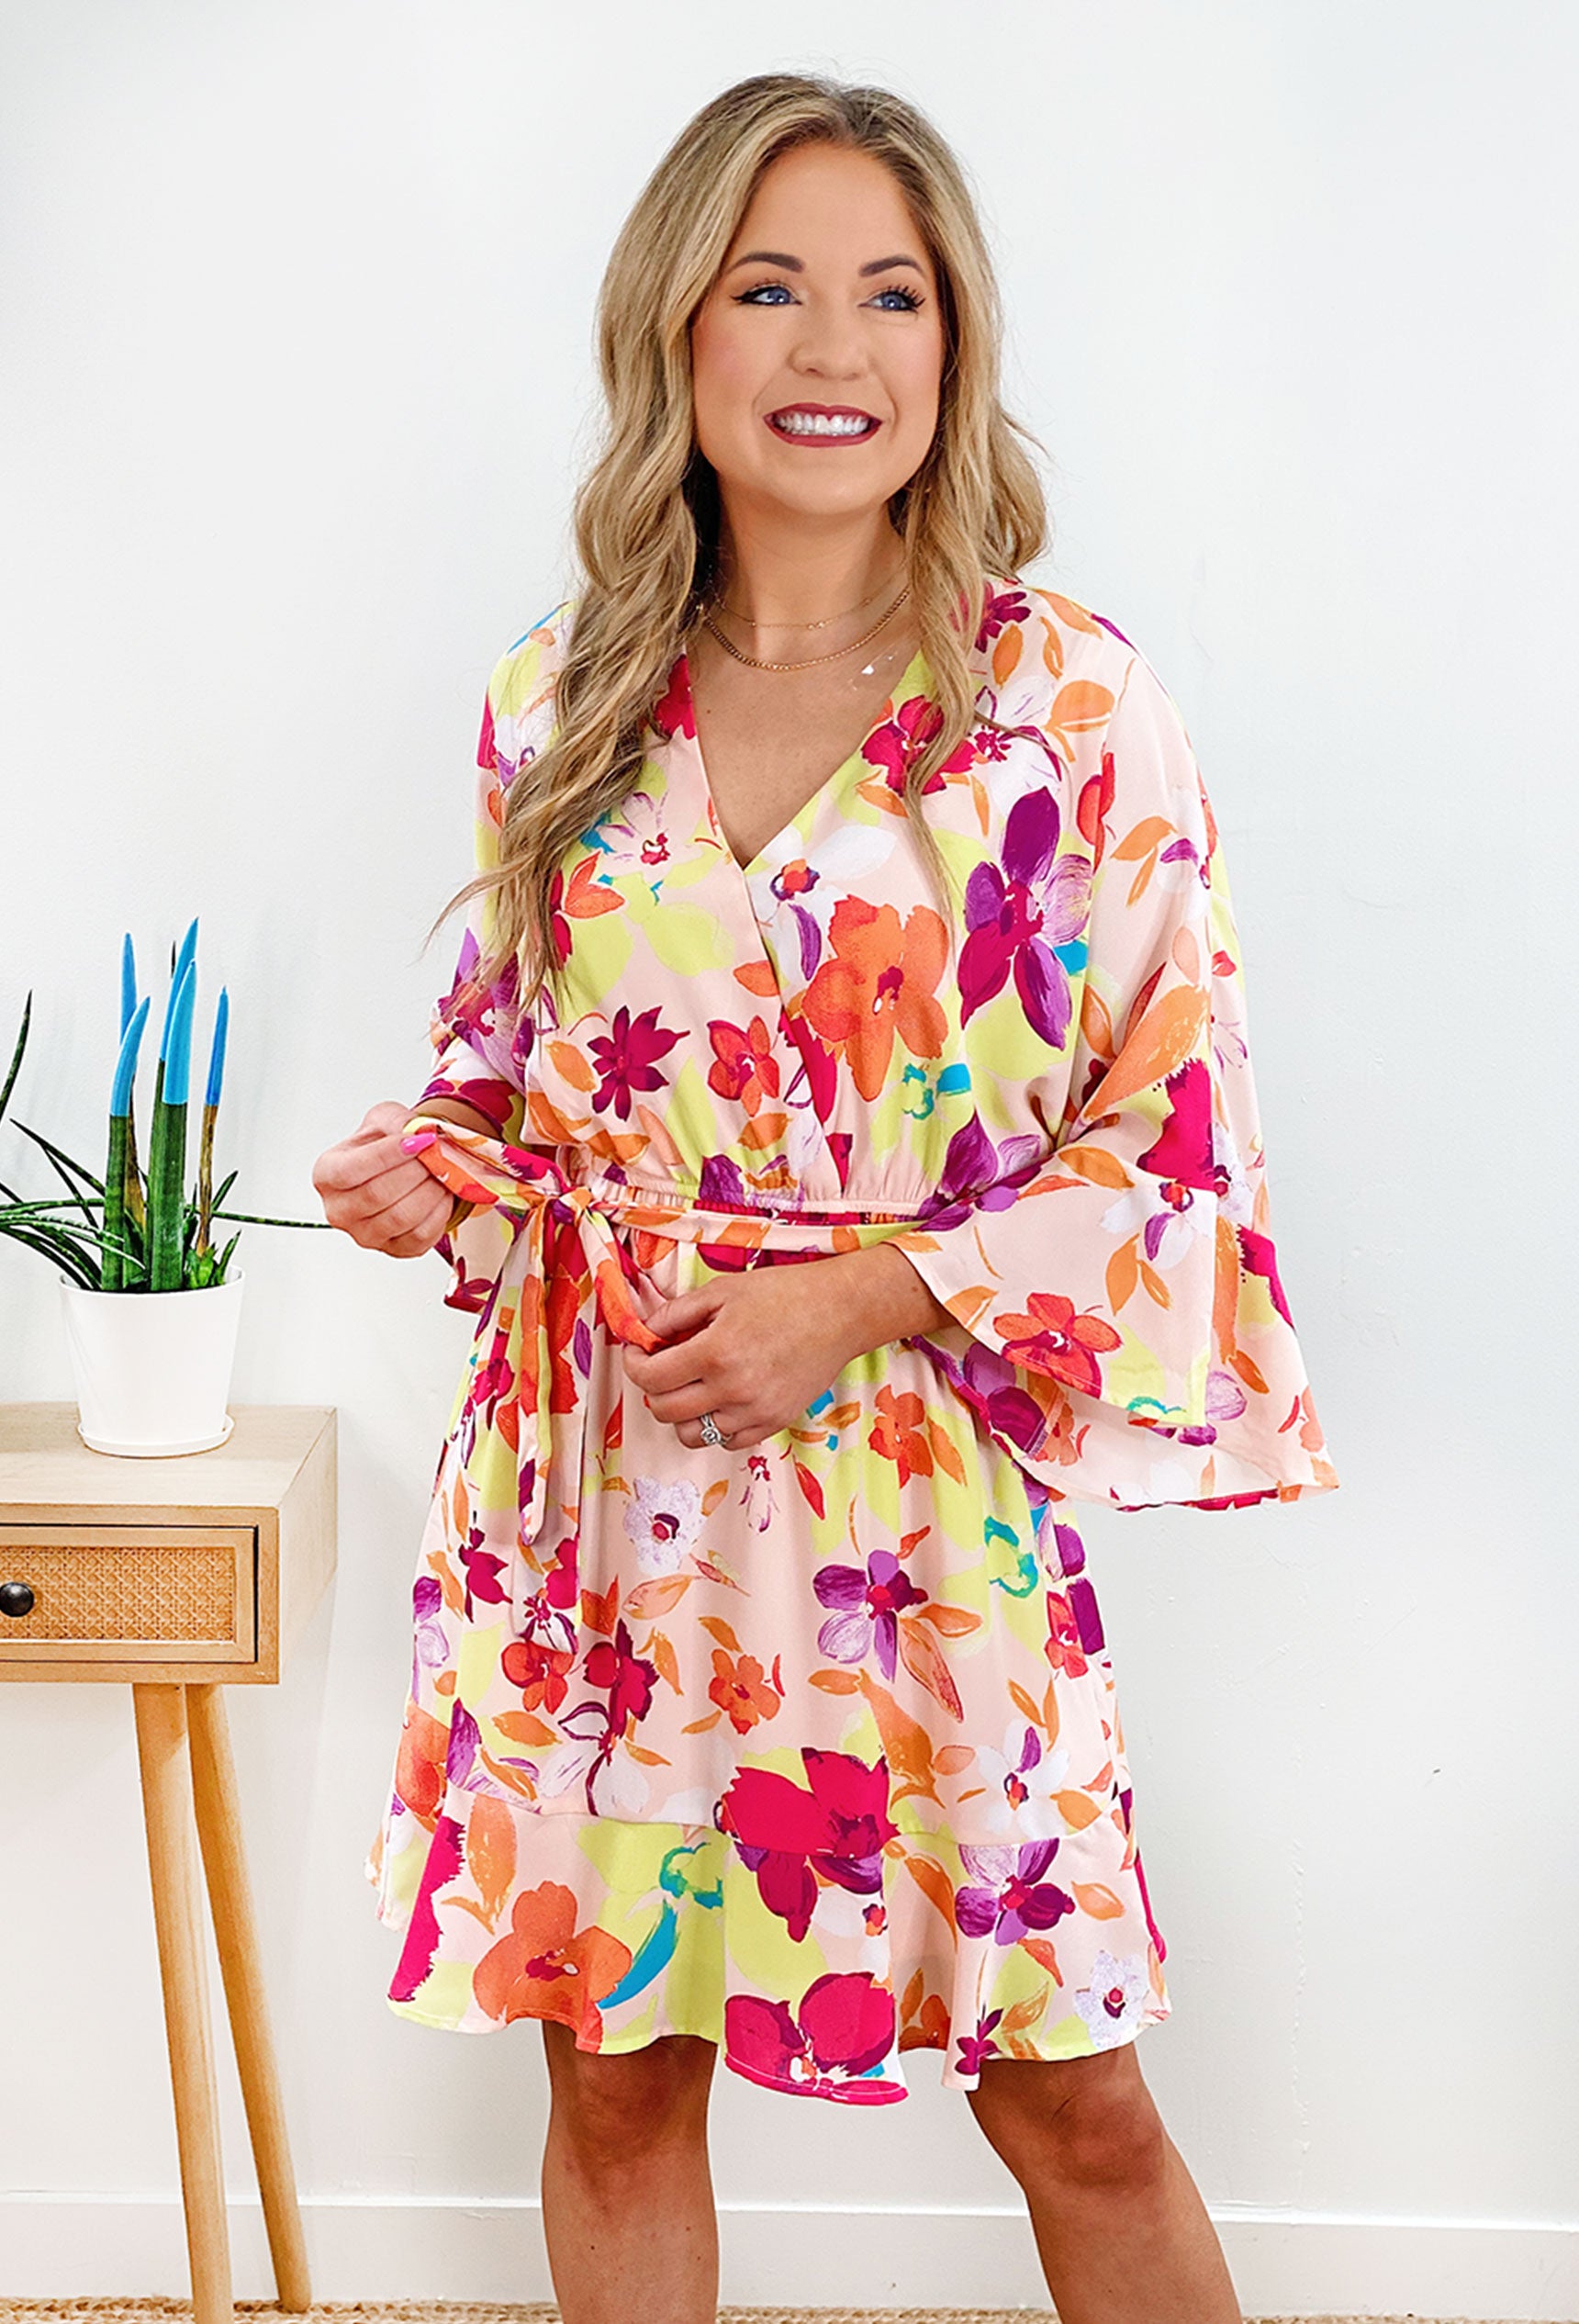 Sincerely Yours Floral Dress, floral dress with sinching around the waist, bell sleeves, self tie detial around waist, v-neck